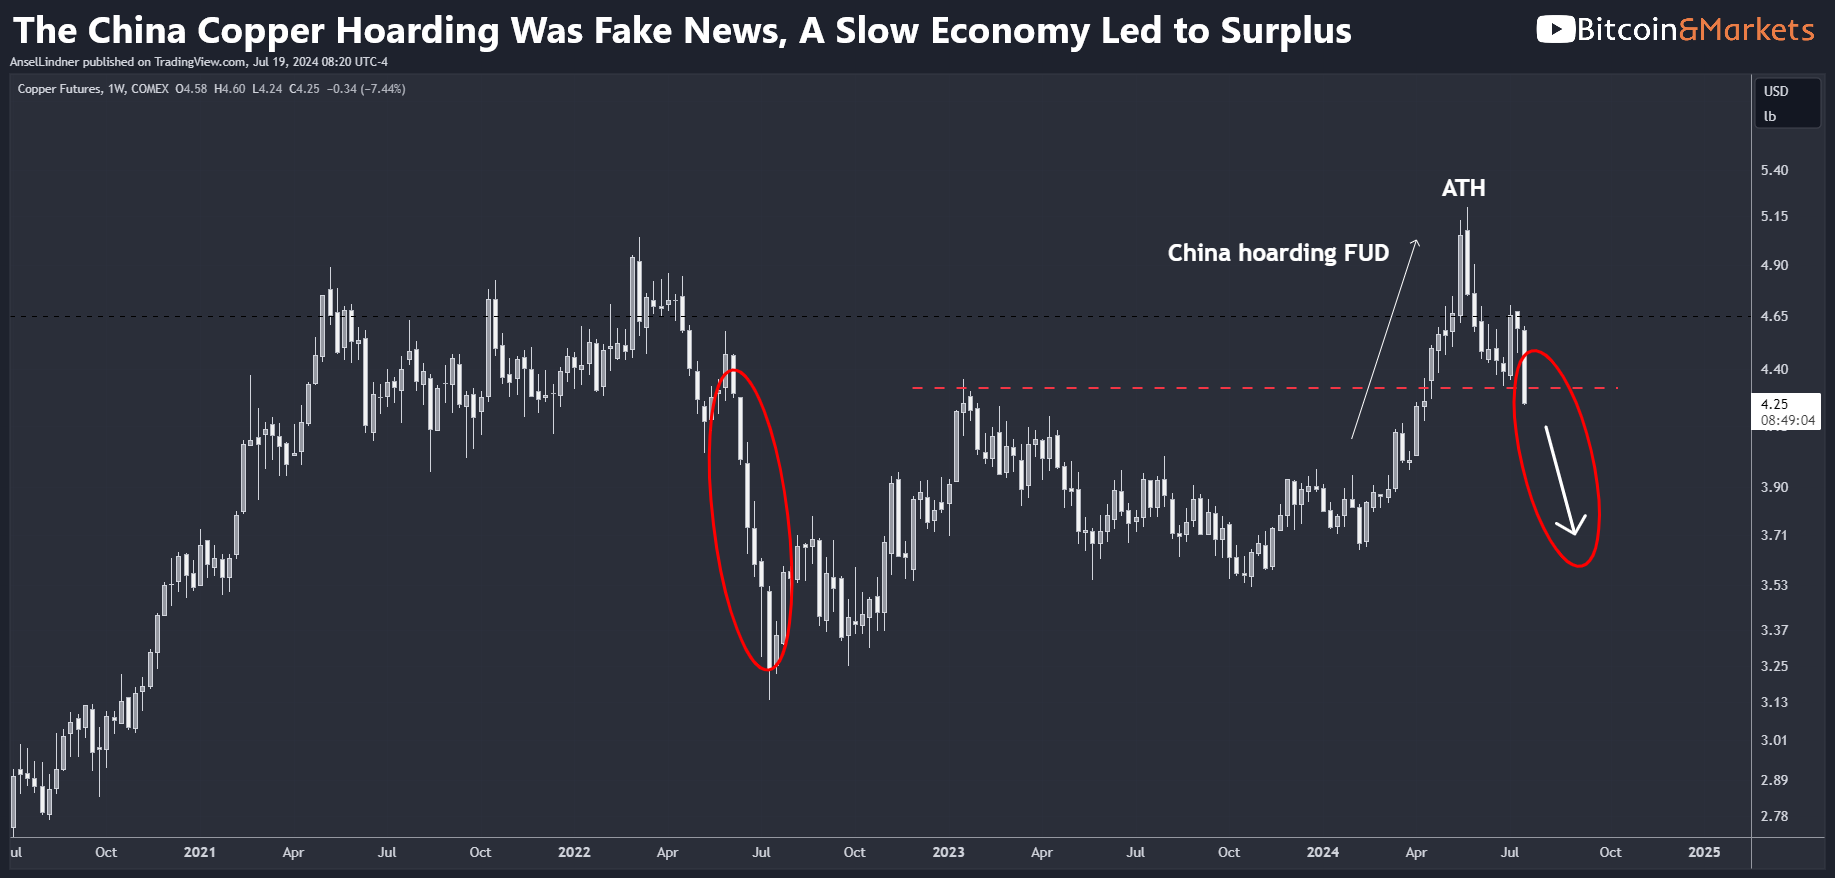 Macro Minute: Dr. Copper Crashing is Bad Signal for the Global Economy